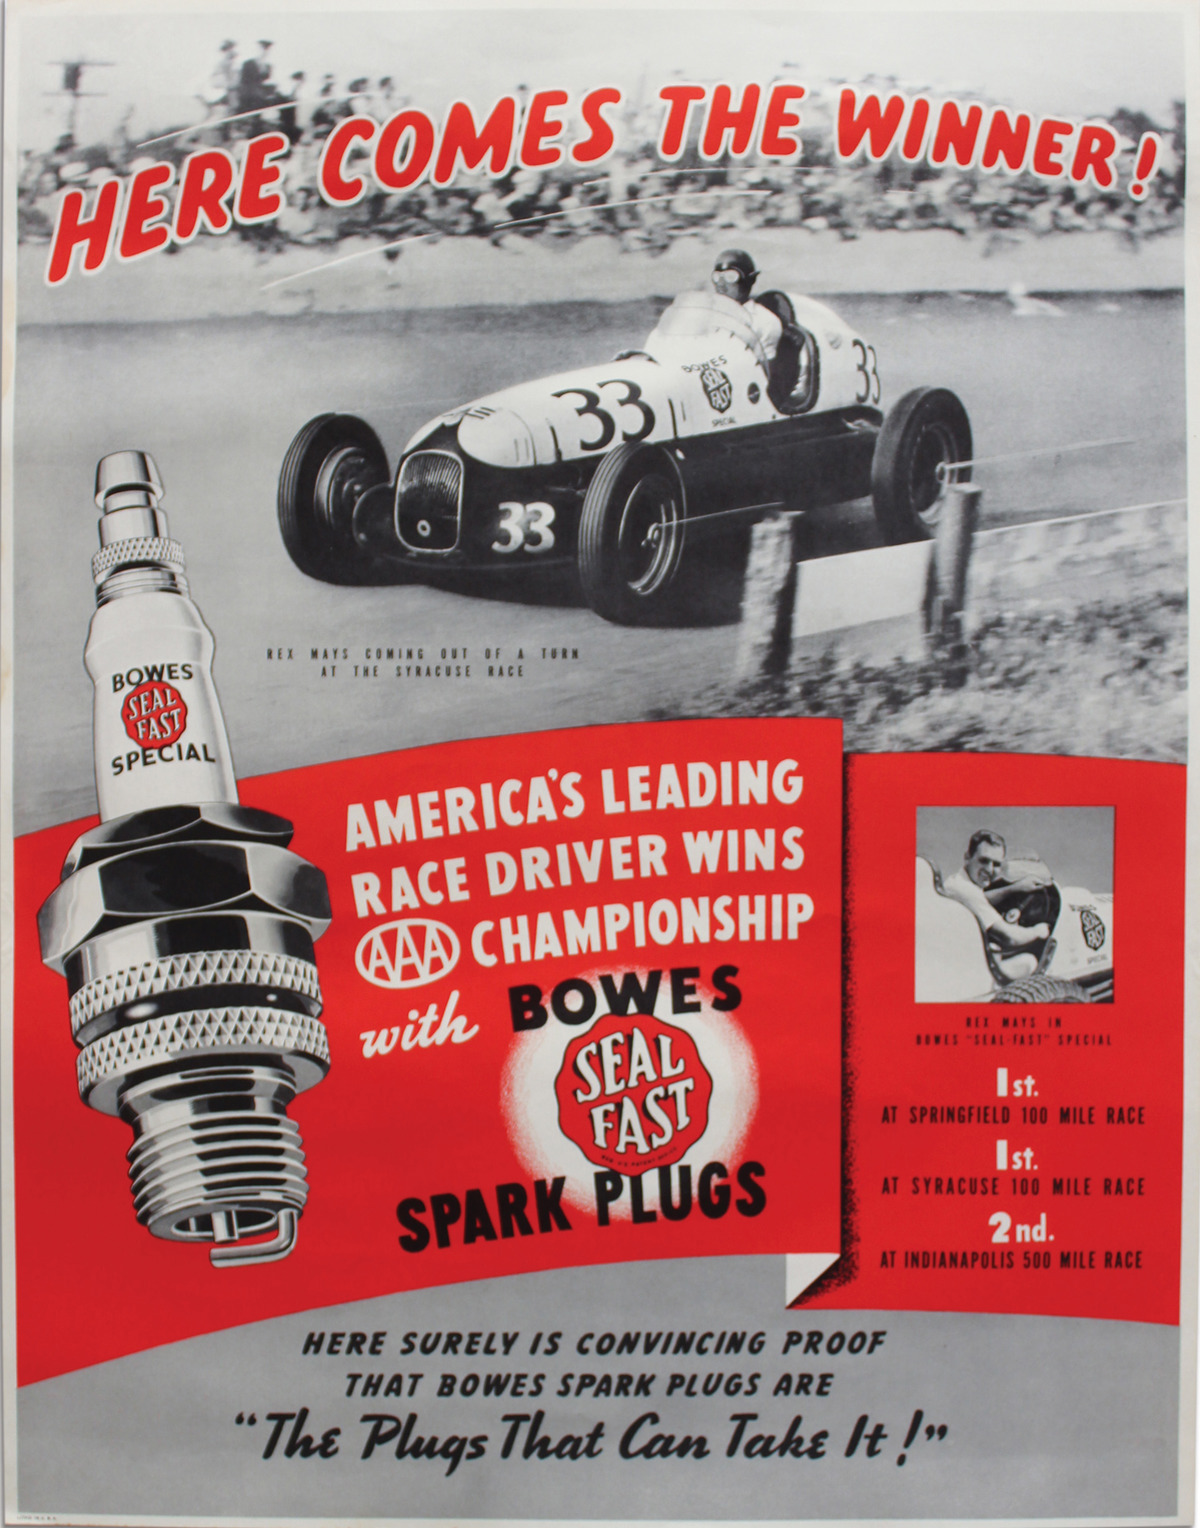 America's Leading Driver Wins Championship with Bowes Spark Plugs poster offered in RM Sotheby's The Art of Competition